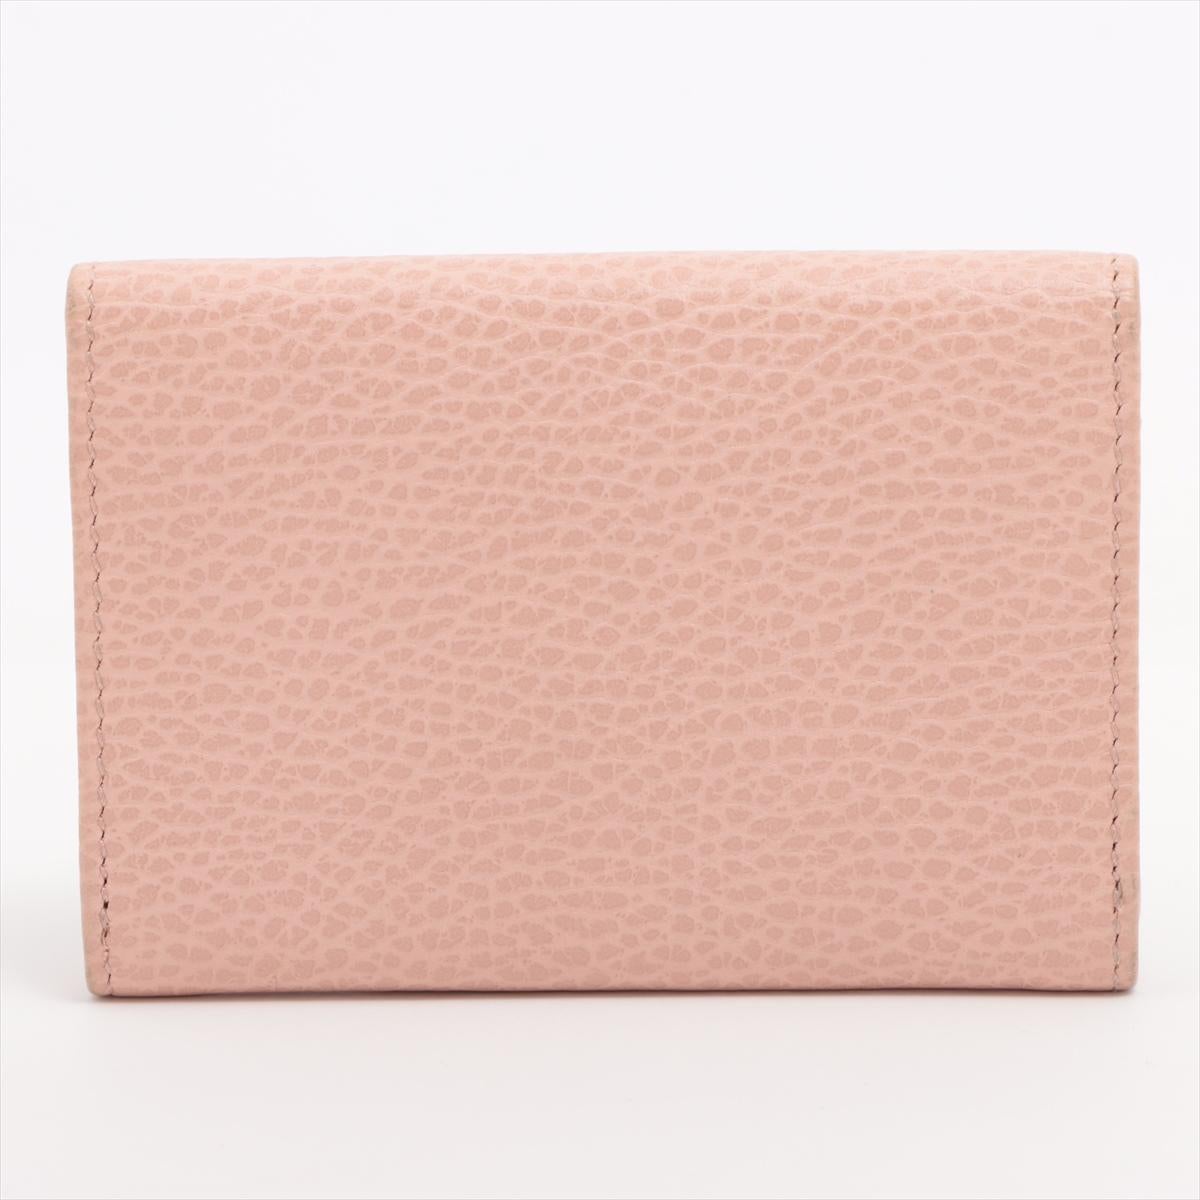 Gucci GG Marmont Leather Card Case Pink In Good Condition For Sale In Indianapolis, IN